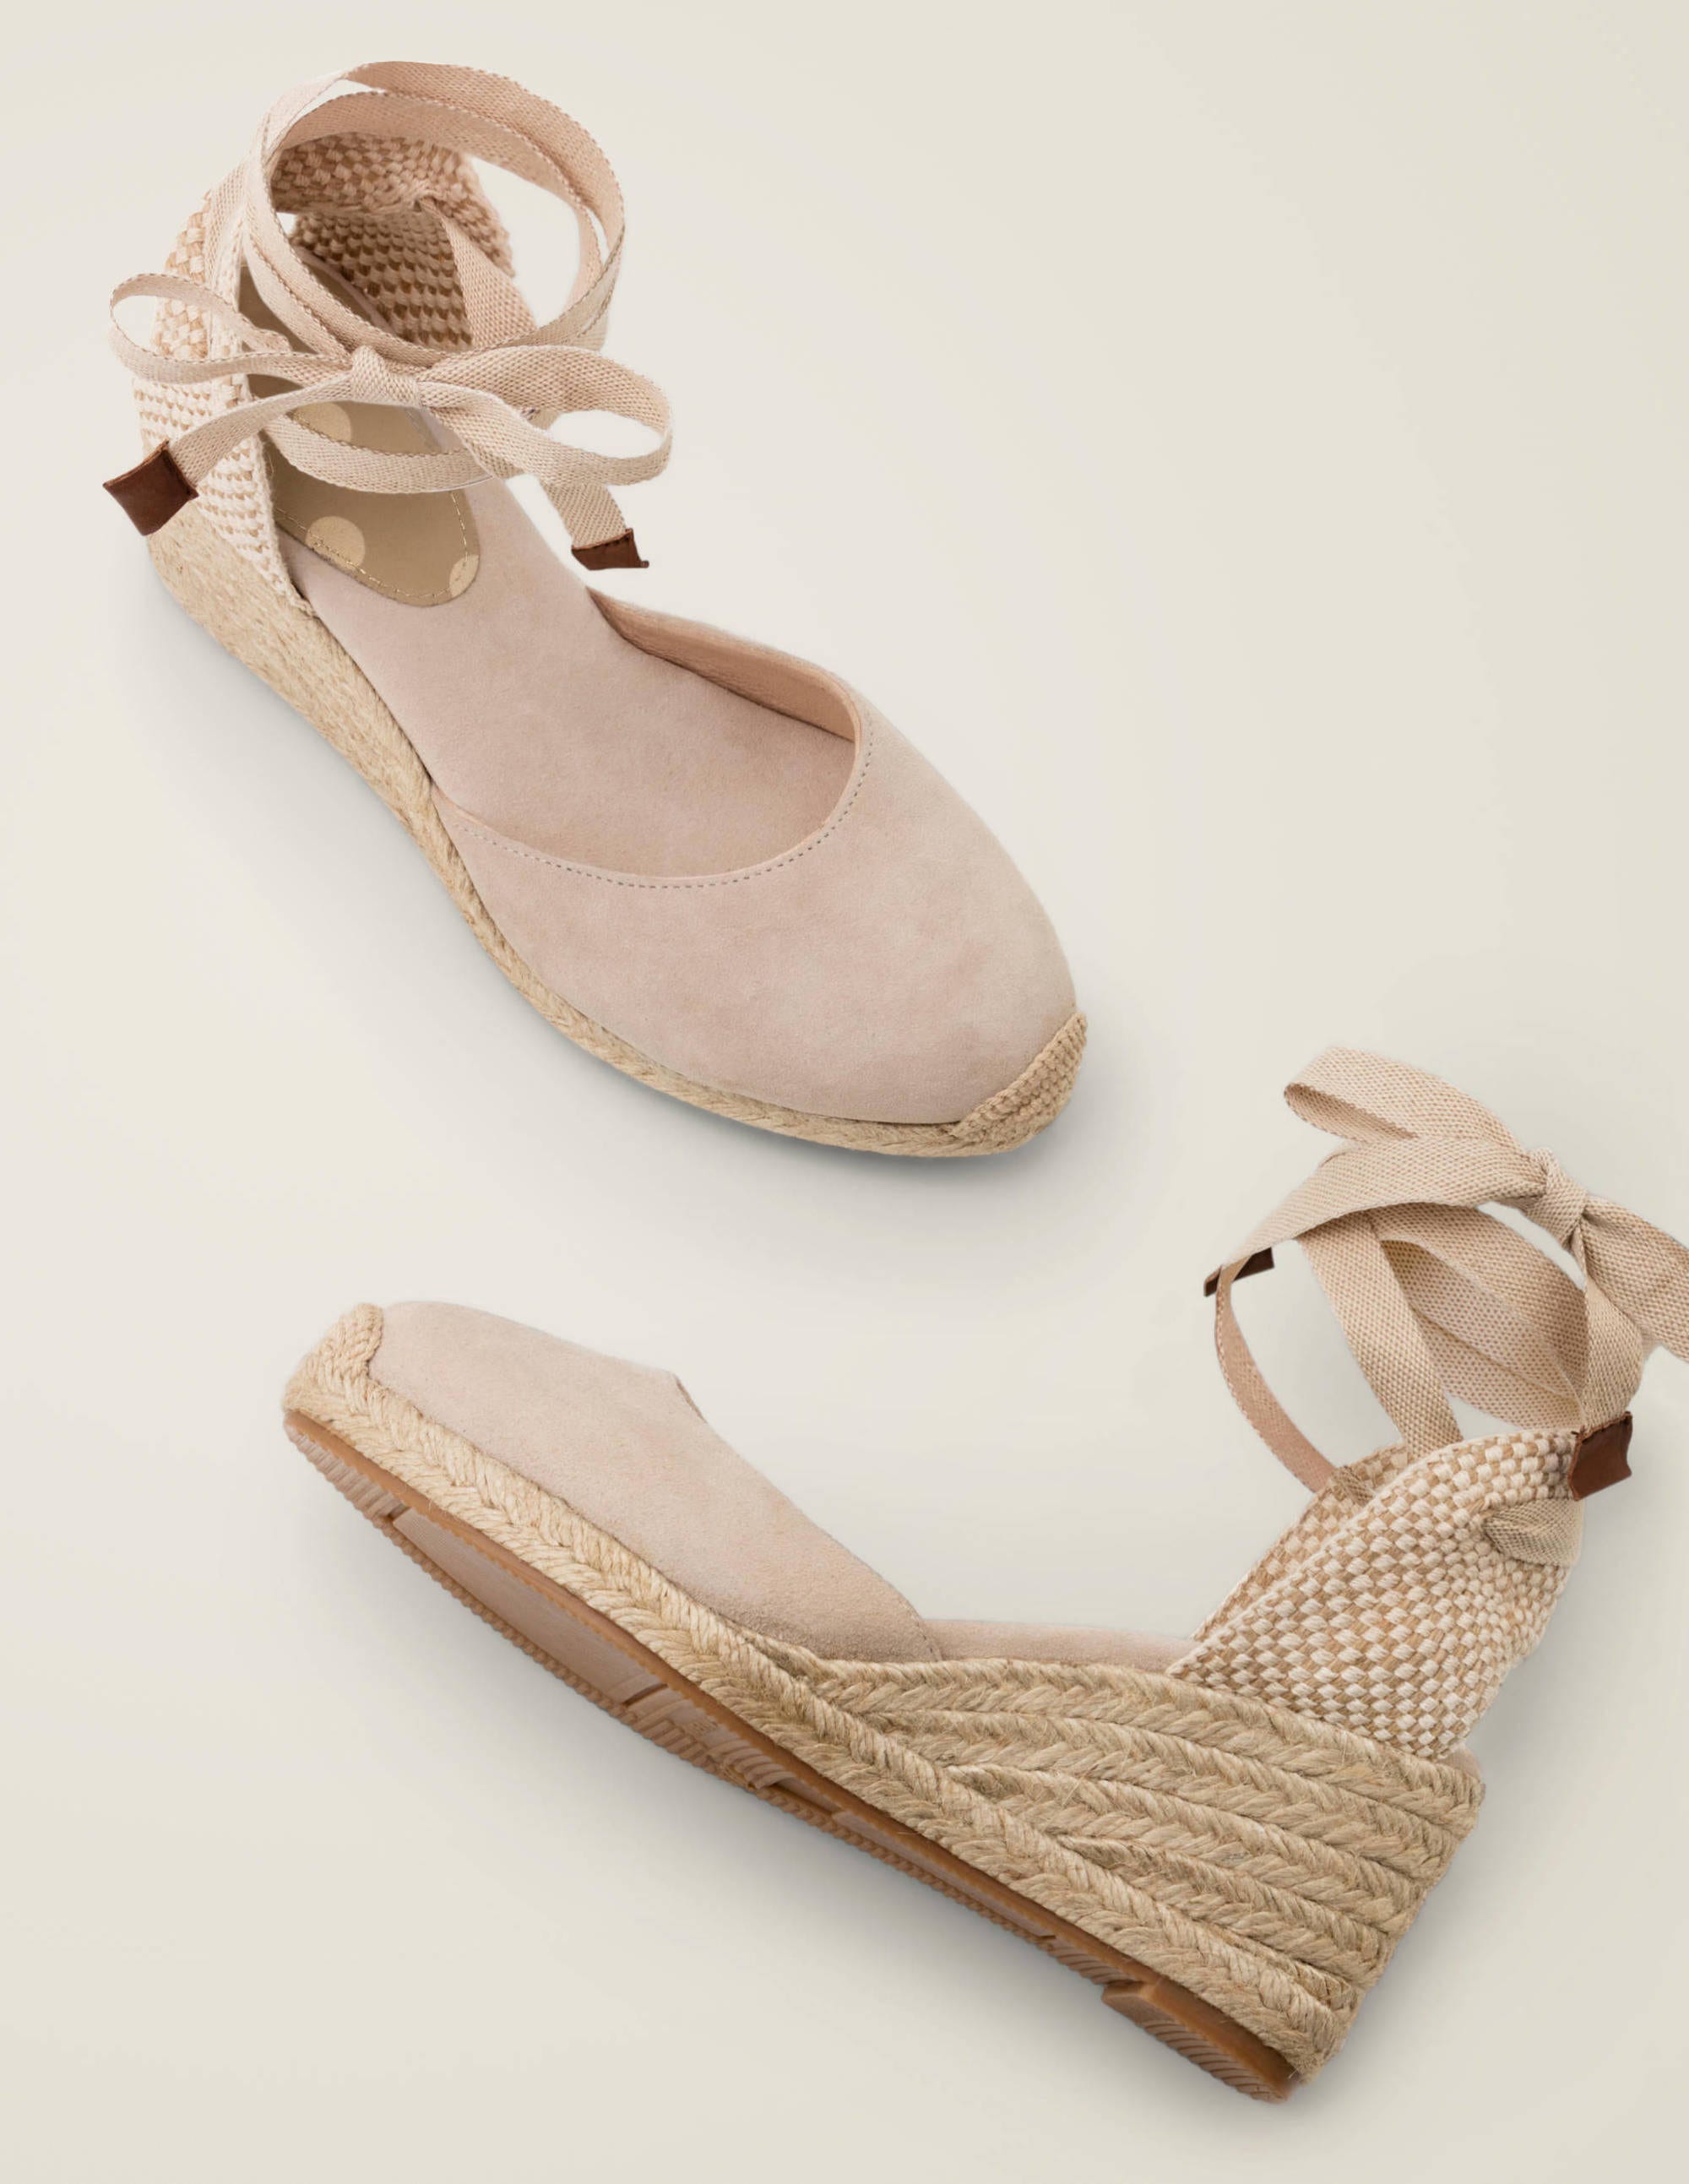 Cassie Espadrille Wedges - Oatmeal 